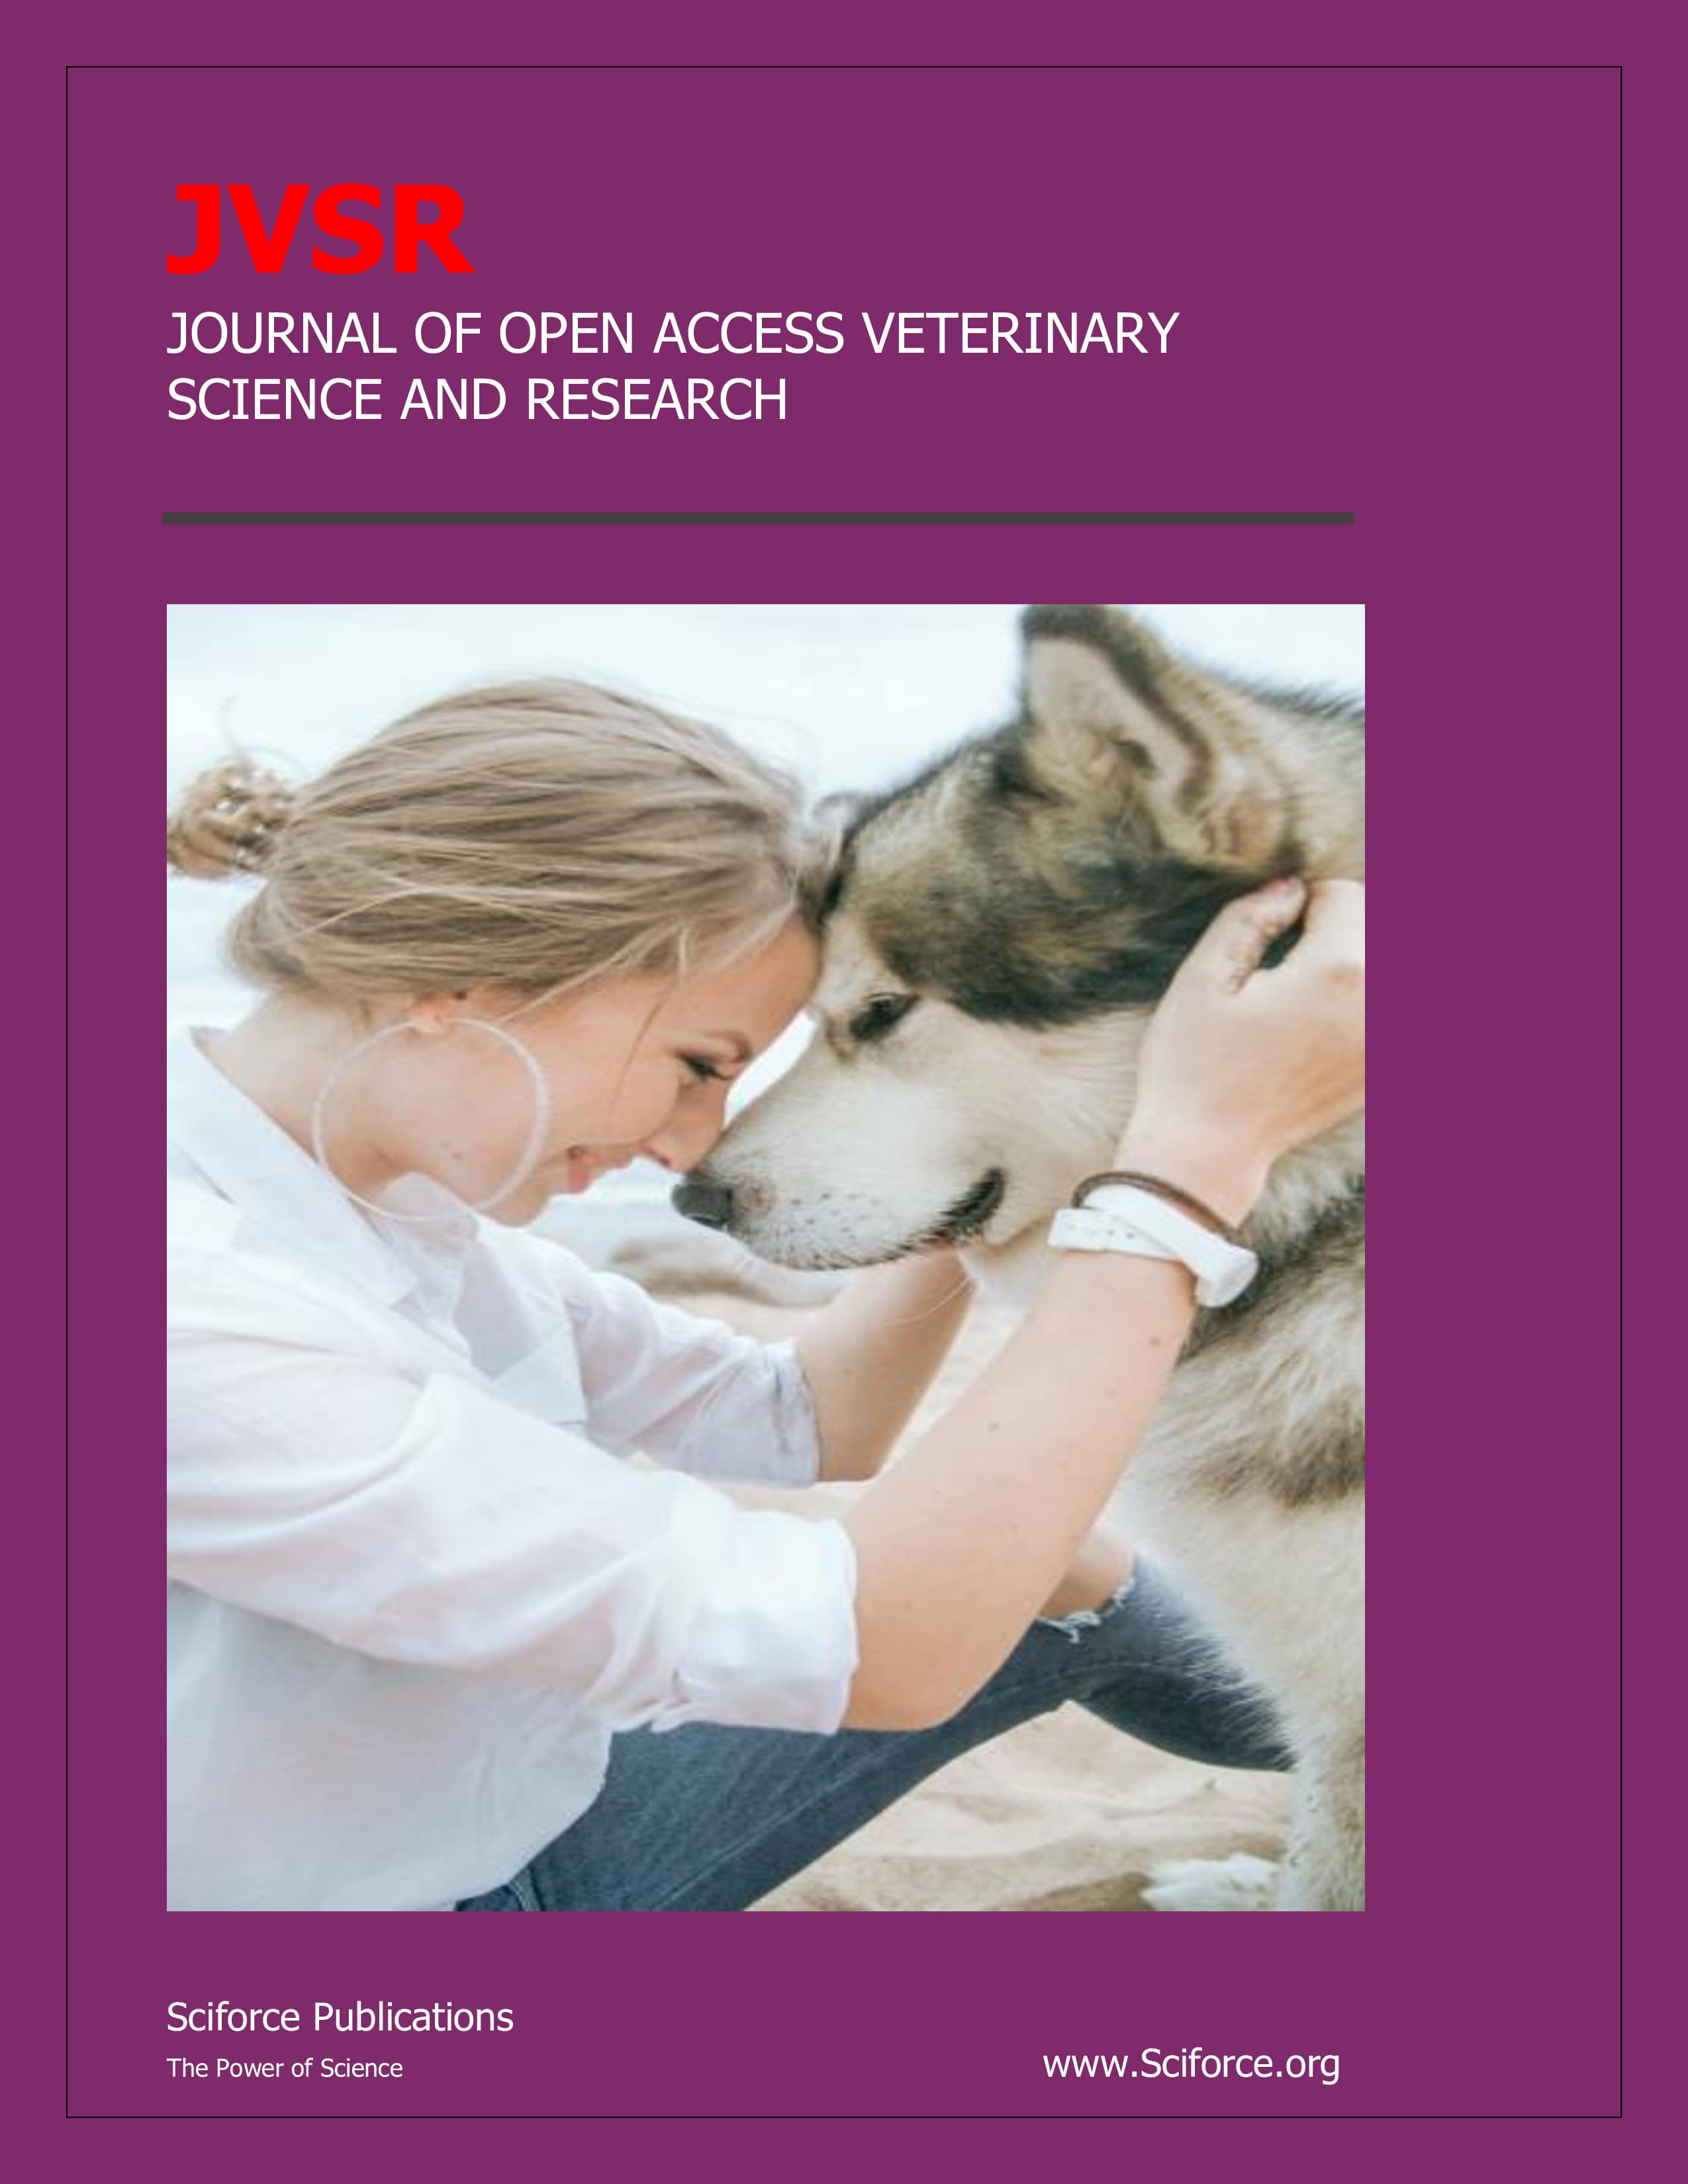 Journal of Open Access Veterinary Science and Research